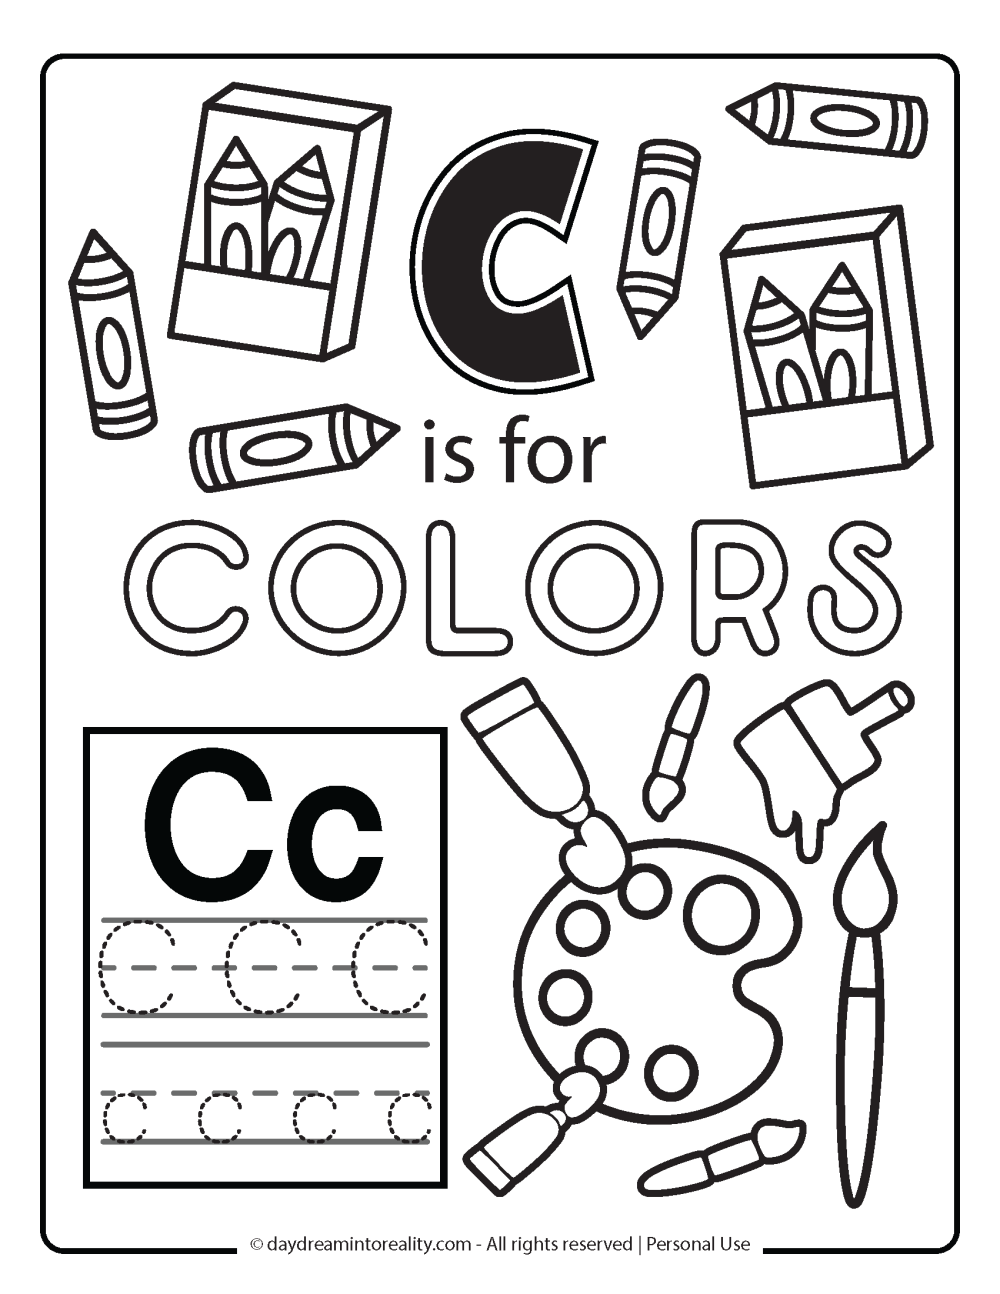 Letter C coloring page free printable - c is for colors